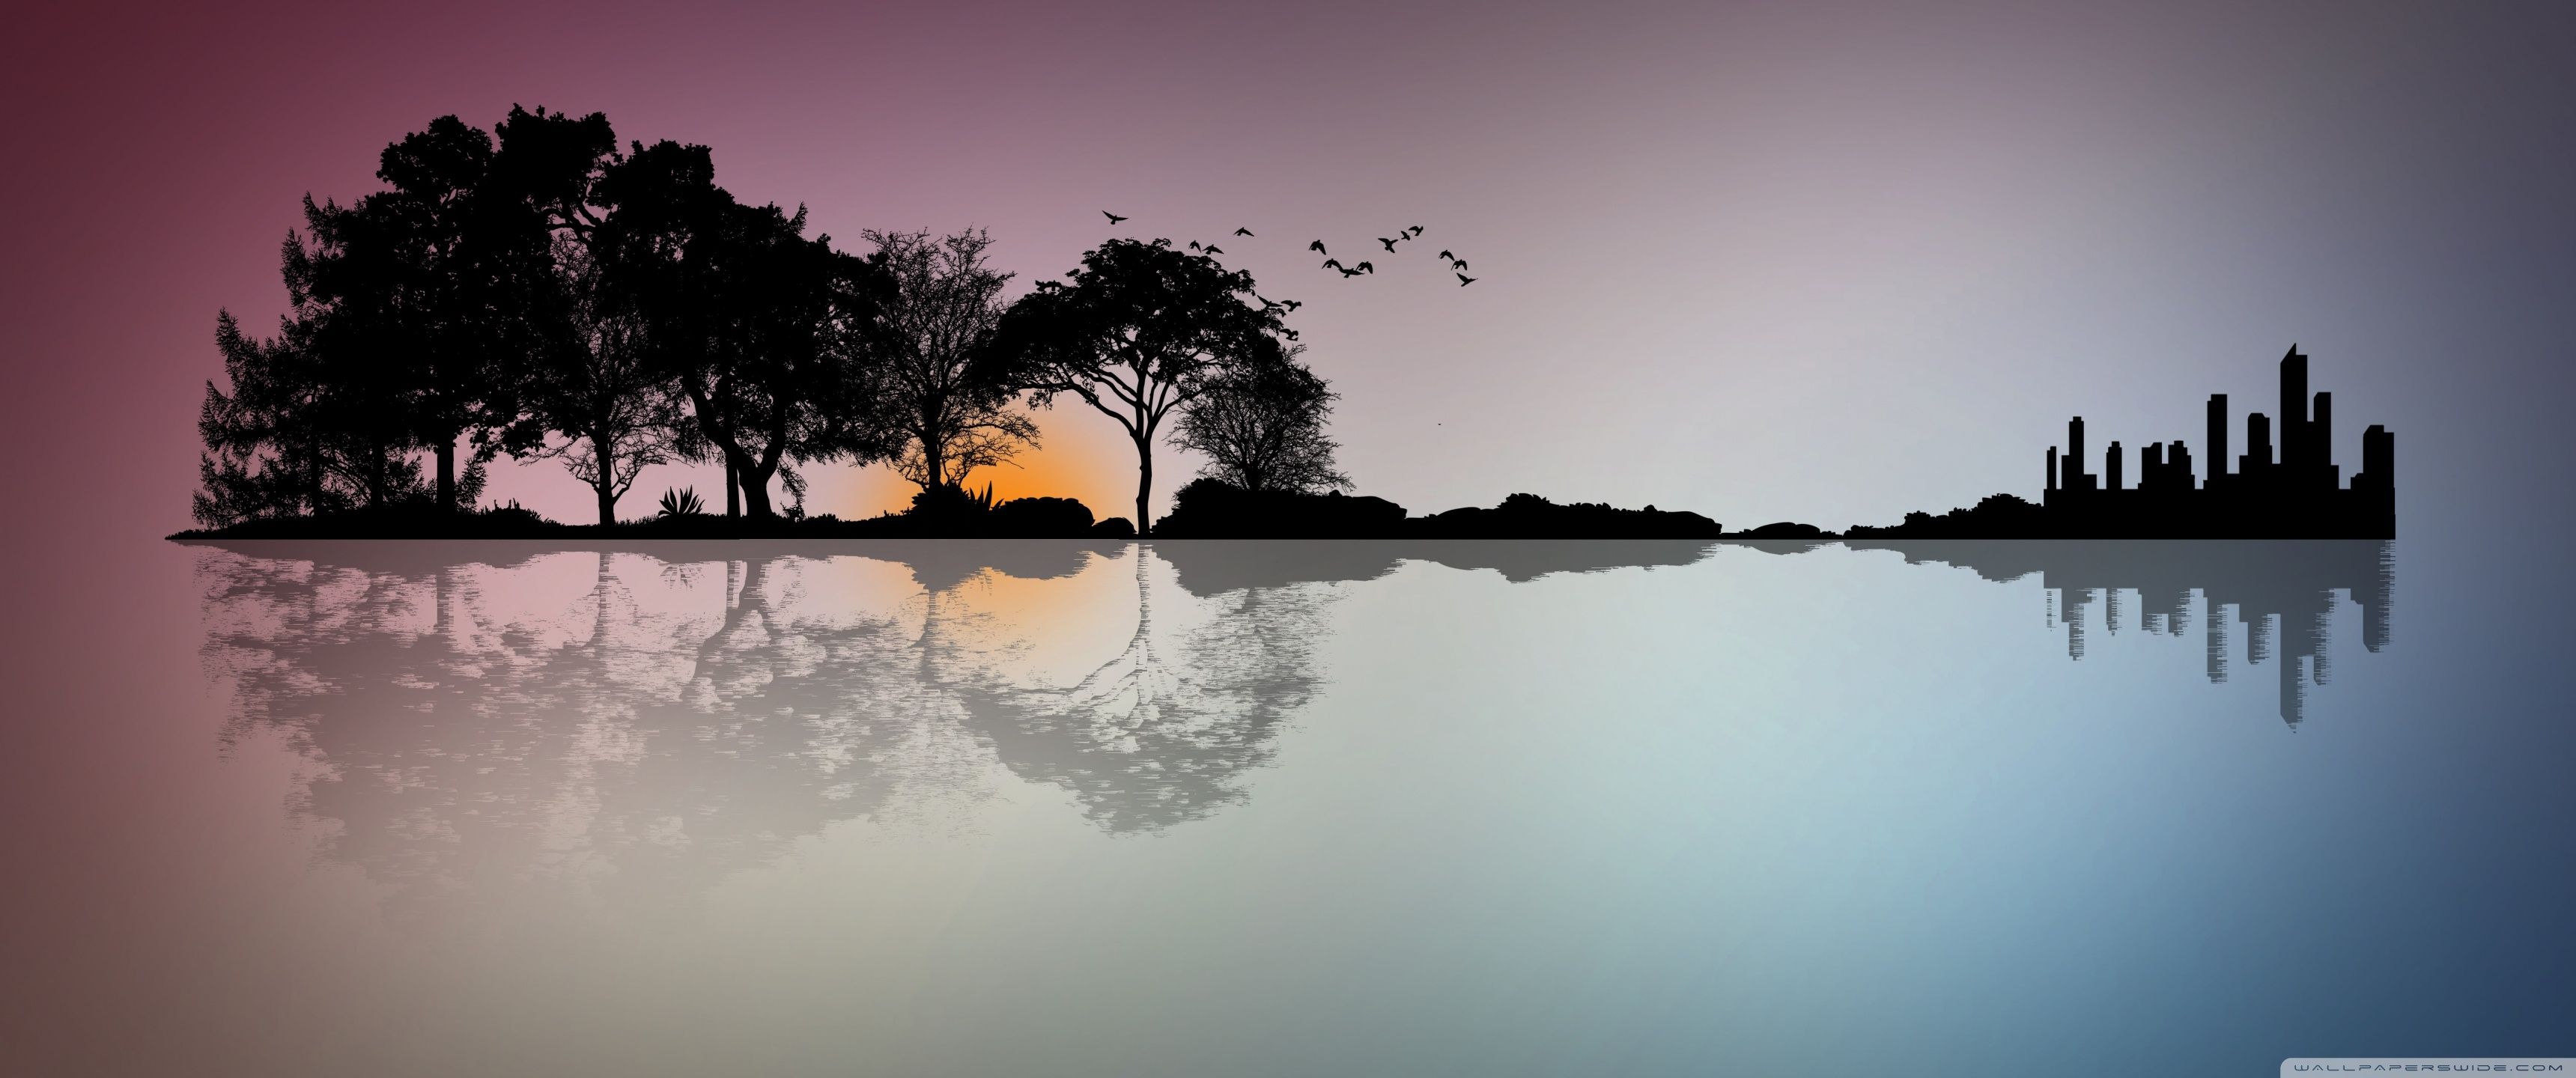 A sunset scene with trees and water - 3440x1440, skyline